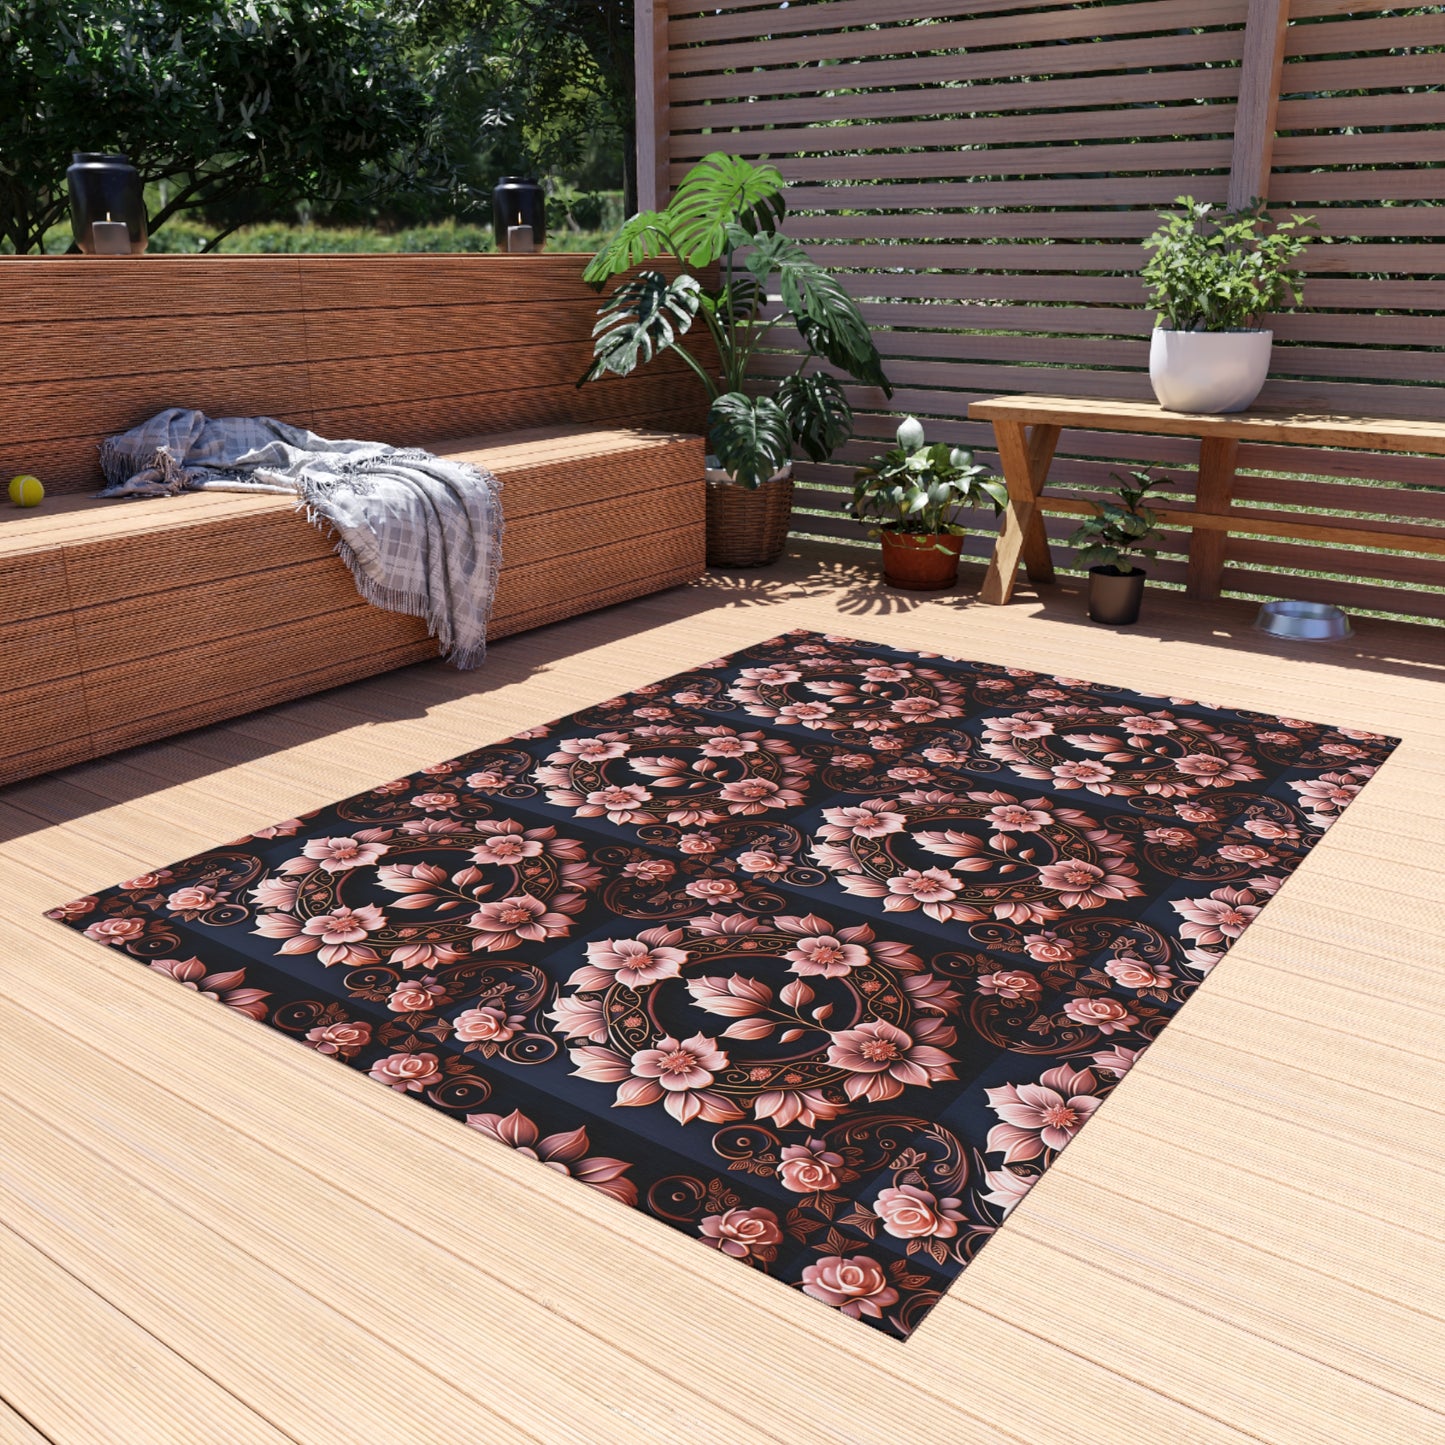 Niccie Royal Rose Picnic Rug - Outdoor Party Mat for Stylish